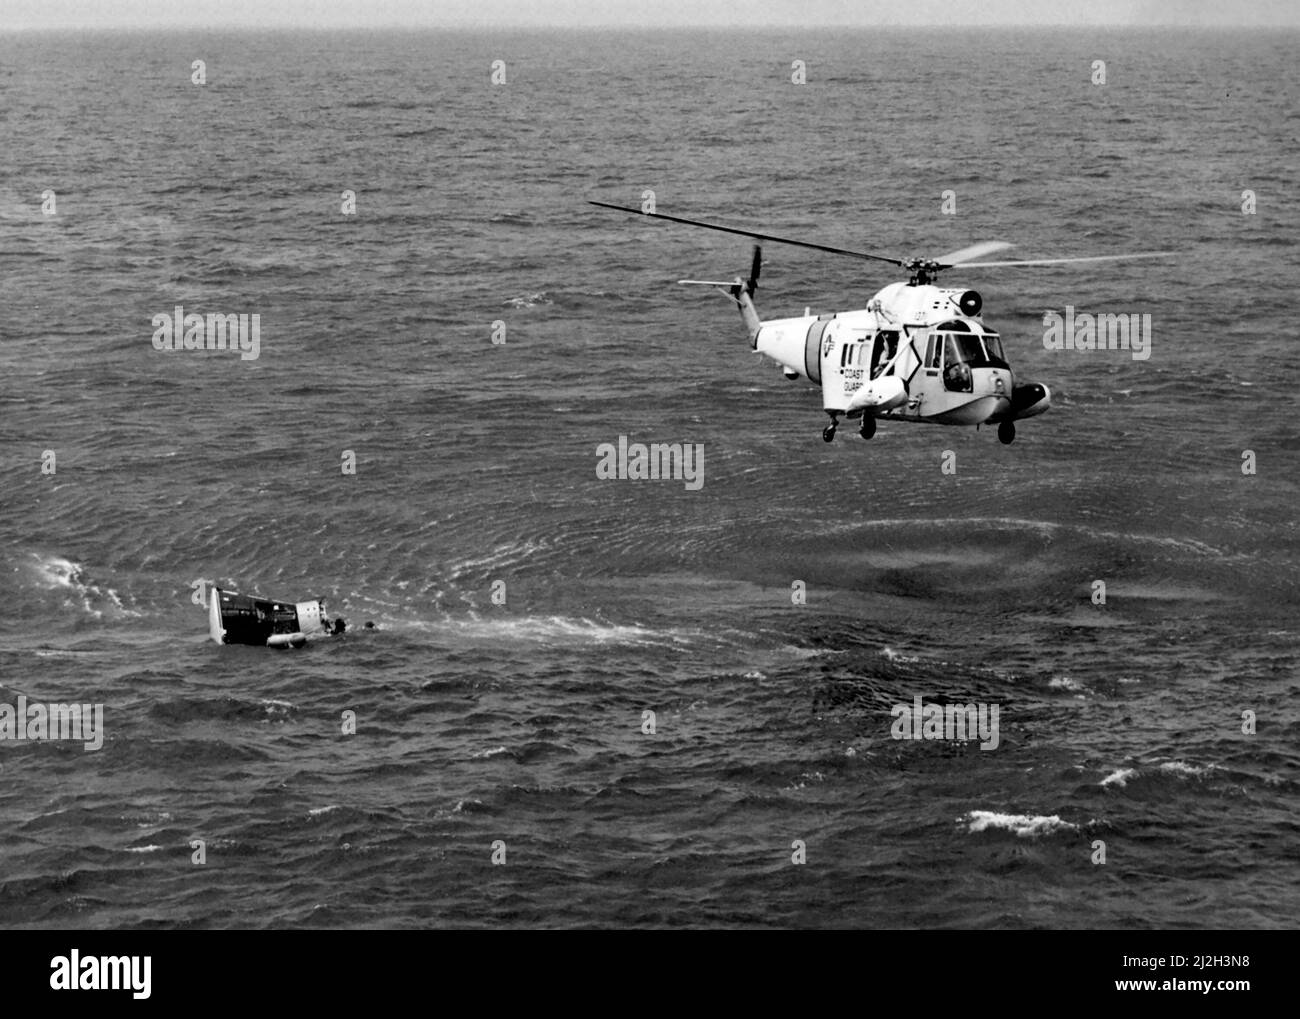 A U.S. Coast Guard Sikorsky HH-52A Seaguard helicopter over the Gemini 3 space capsule flown by astronauts Gus Grissom and John Young after it splashed down in the Atlantic Ocean, 23 March 1965. The aircraft carrier USS Intrepid (CVS-11) recovered the craft and crew. Stock Photo